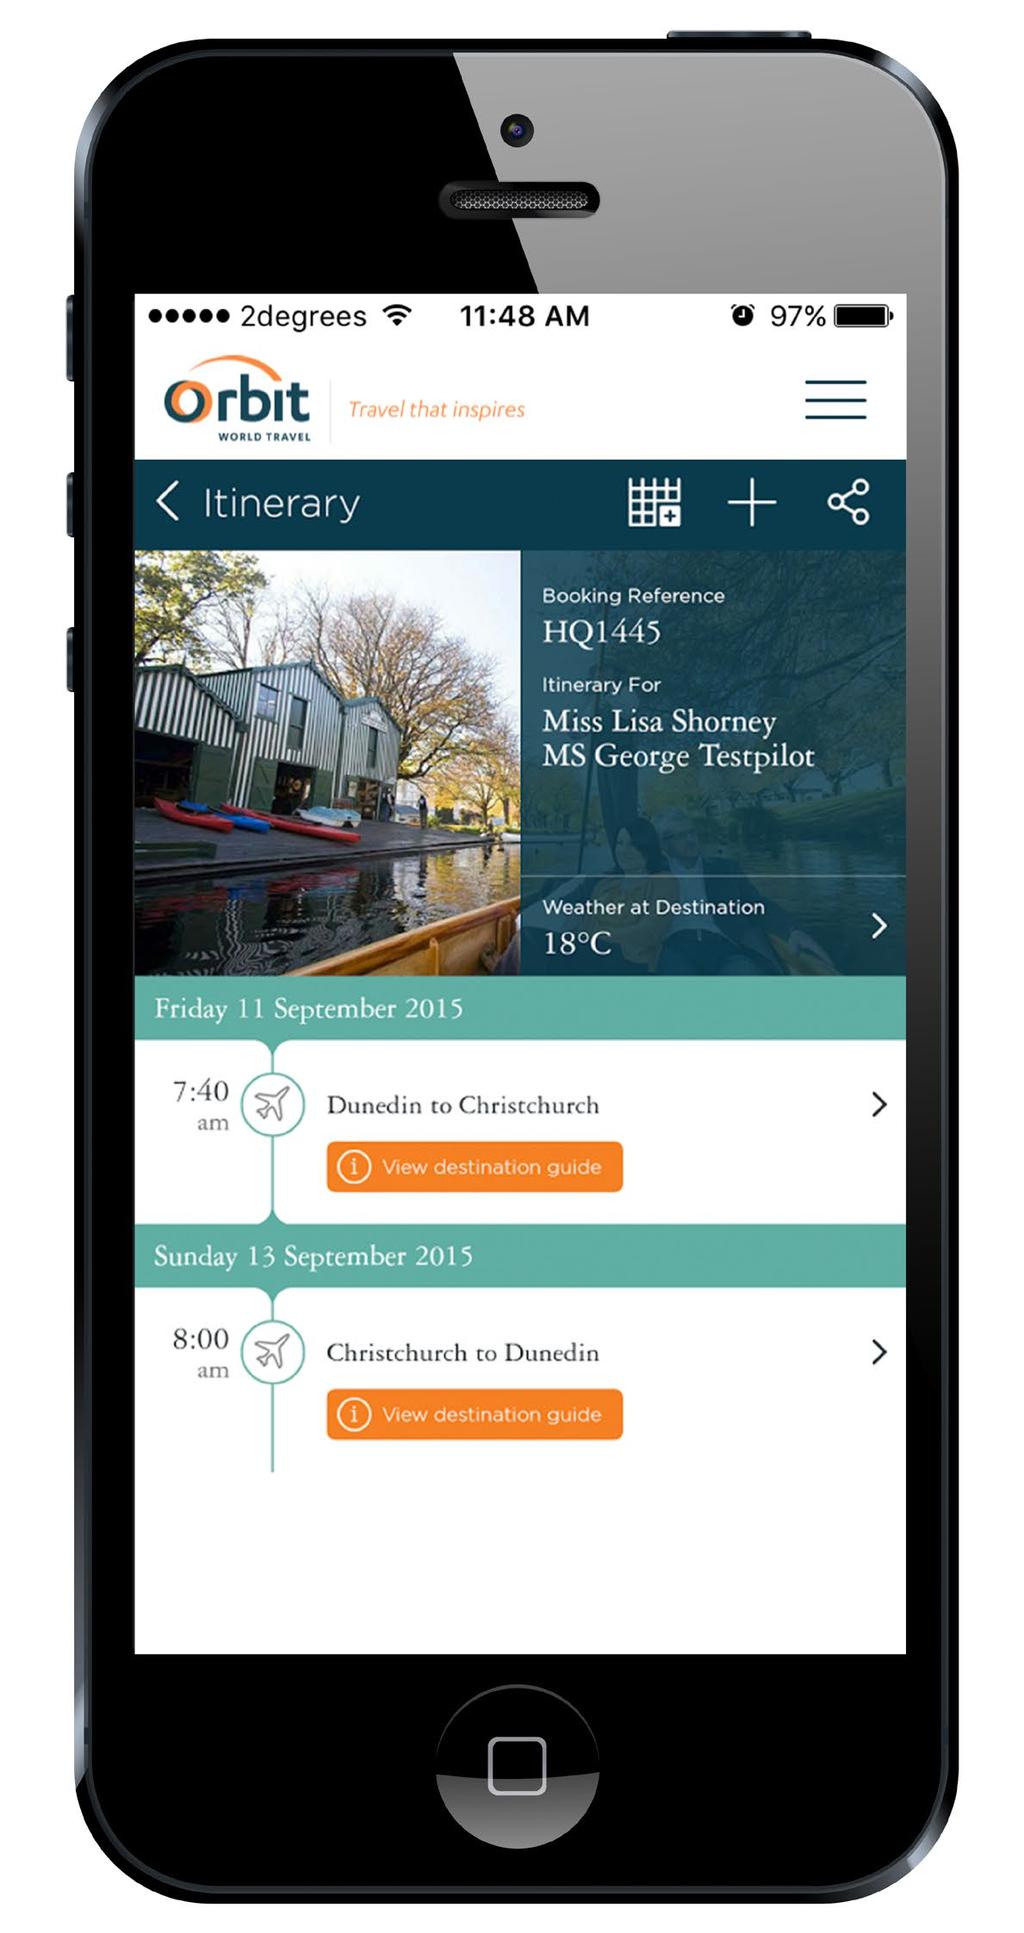 Key Features Itinerary Everything booked through Orbit appears in the itinerary of the App. Adding events to your itinerary While the itinerary will show your flights, accommodation etc.